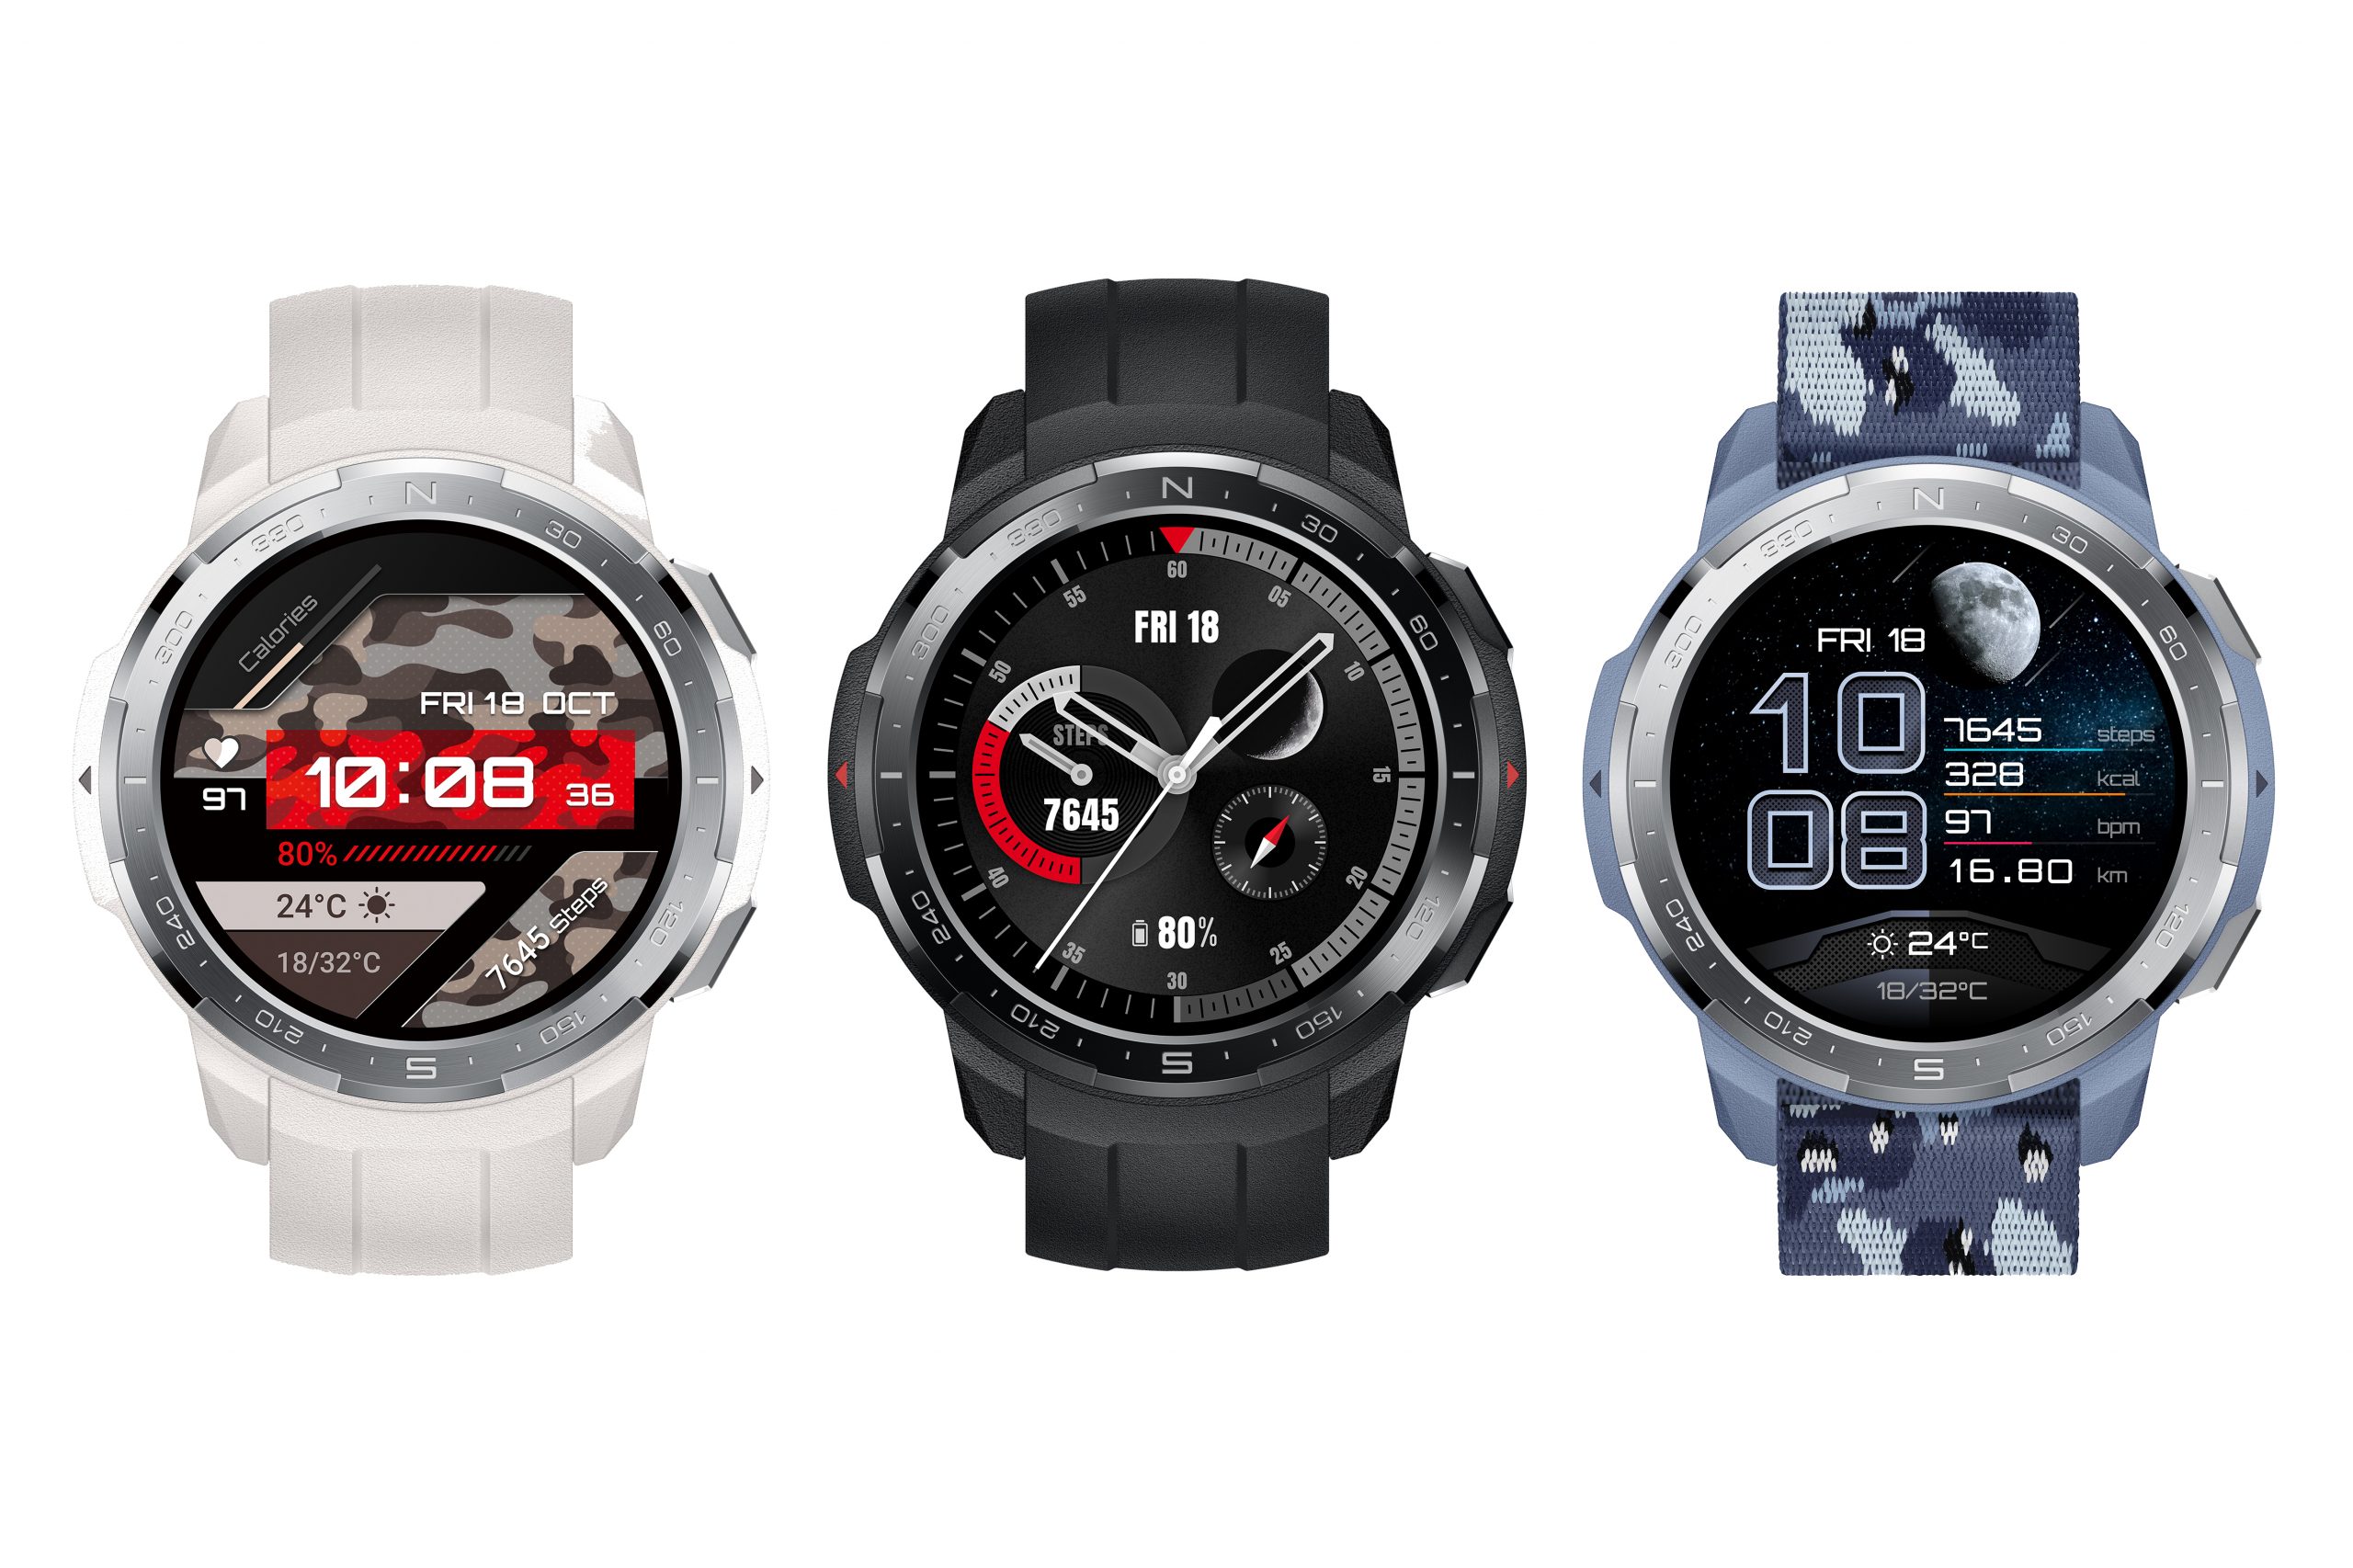 Introducing New Outdoor Smartwatch And High-Performance Laptop, HONOR Brings All-Scenario Smart 